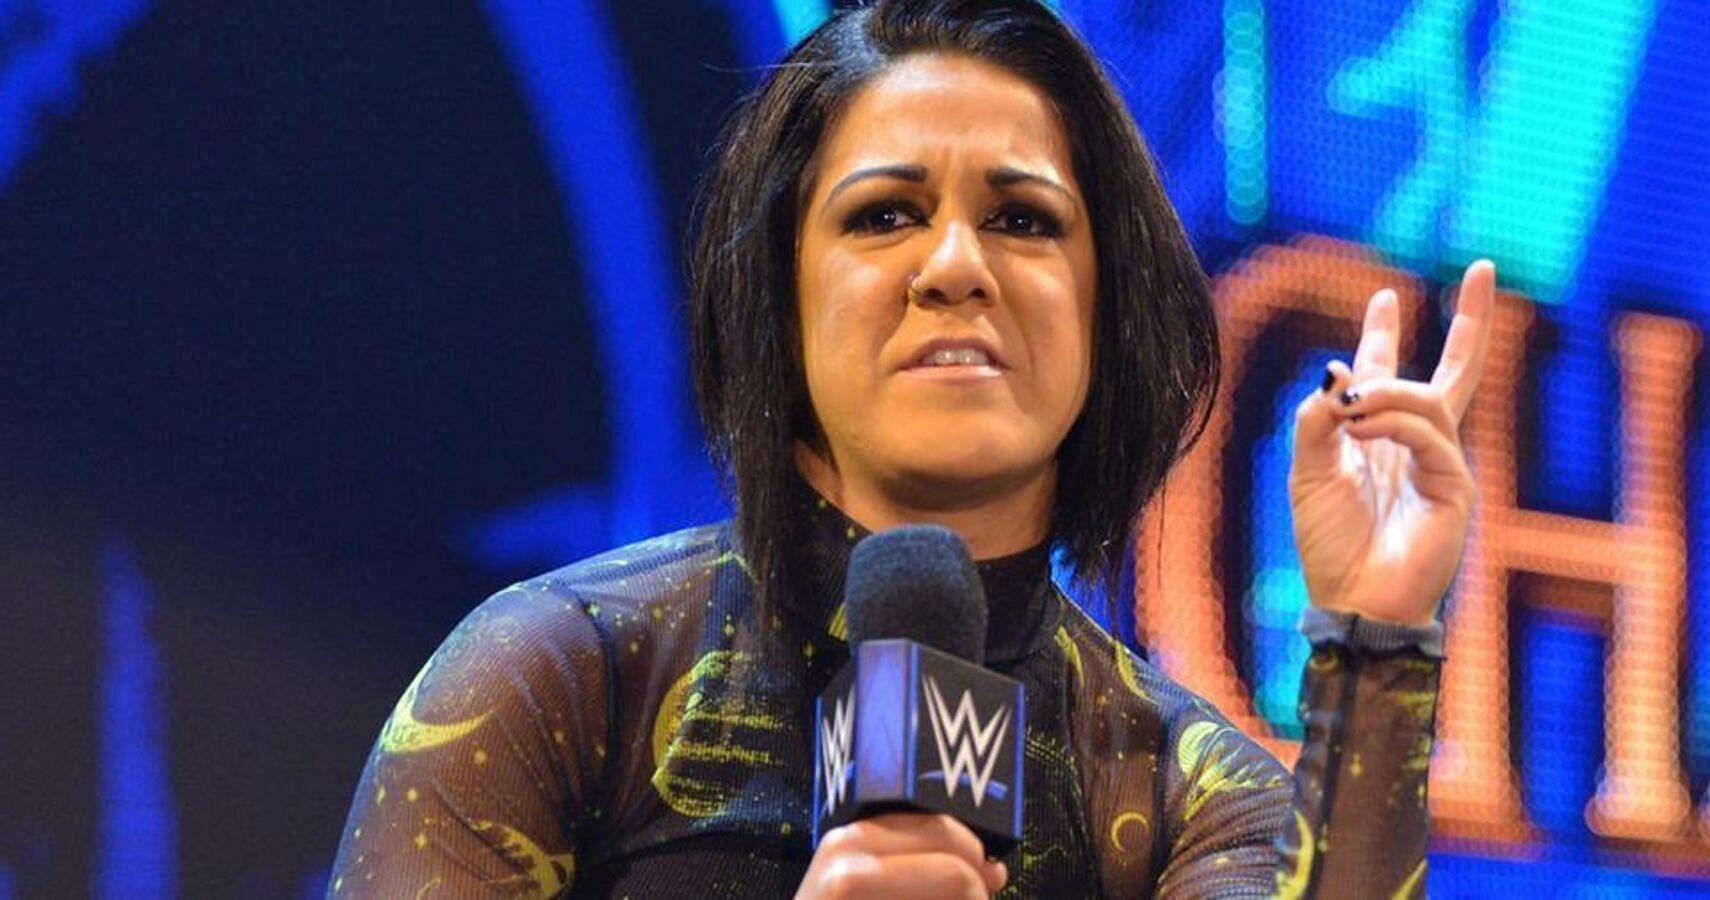 When will Bayley return to the Squared Circle?